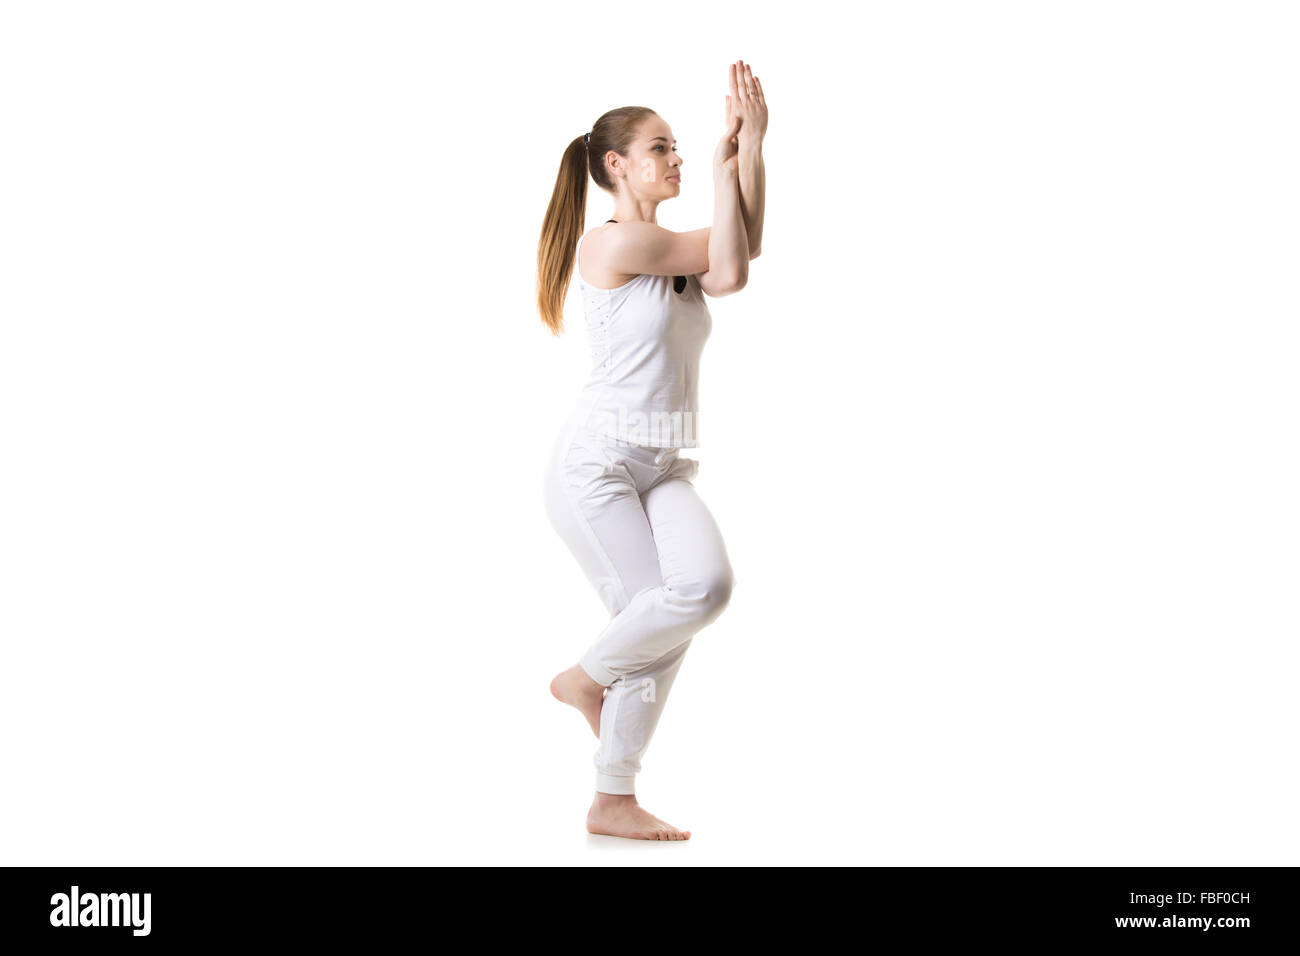 Try these 3 yoga poses to improve your Concentration (hold for 2 mins ... |  TikTok